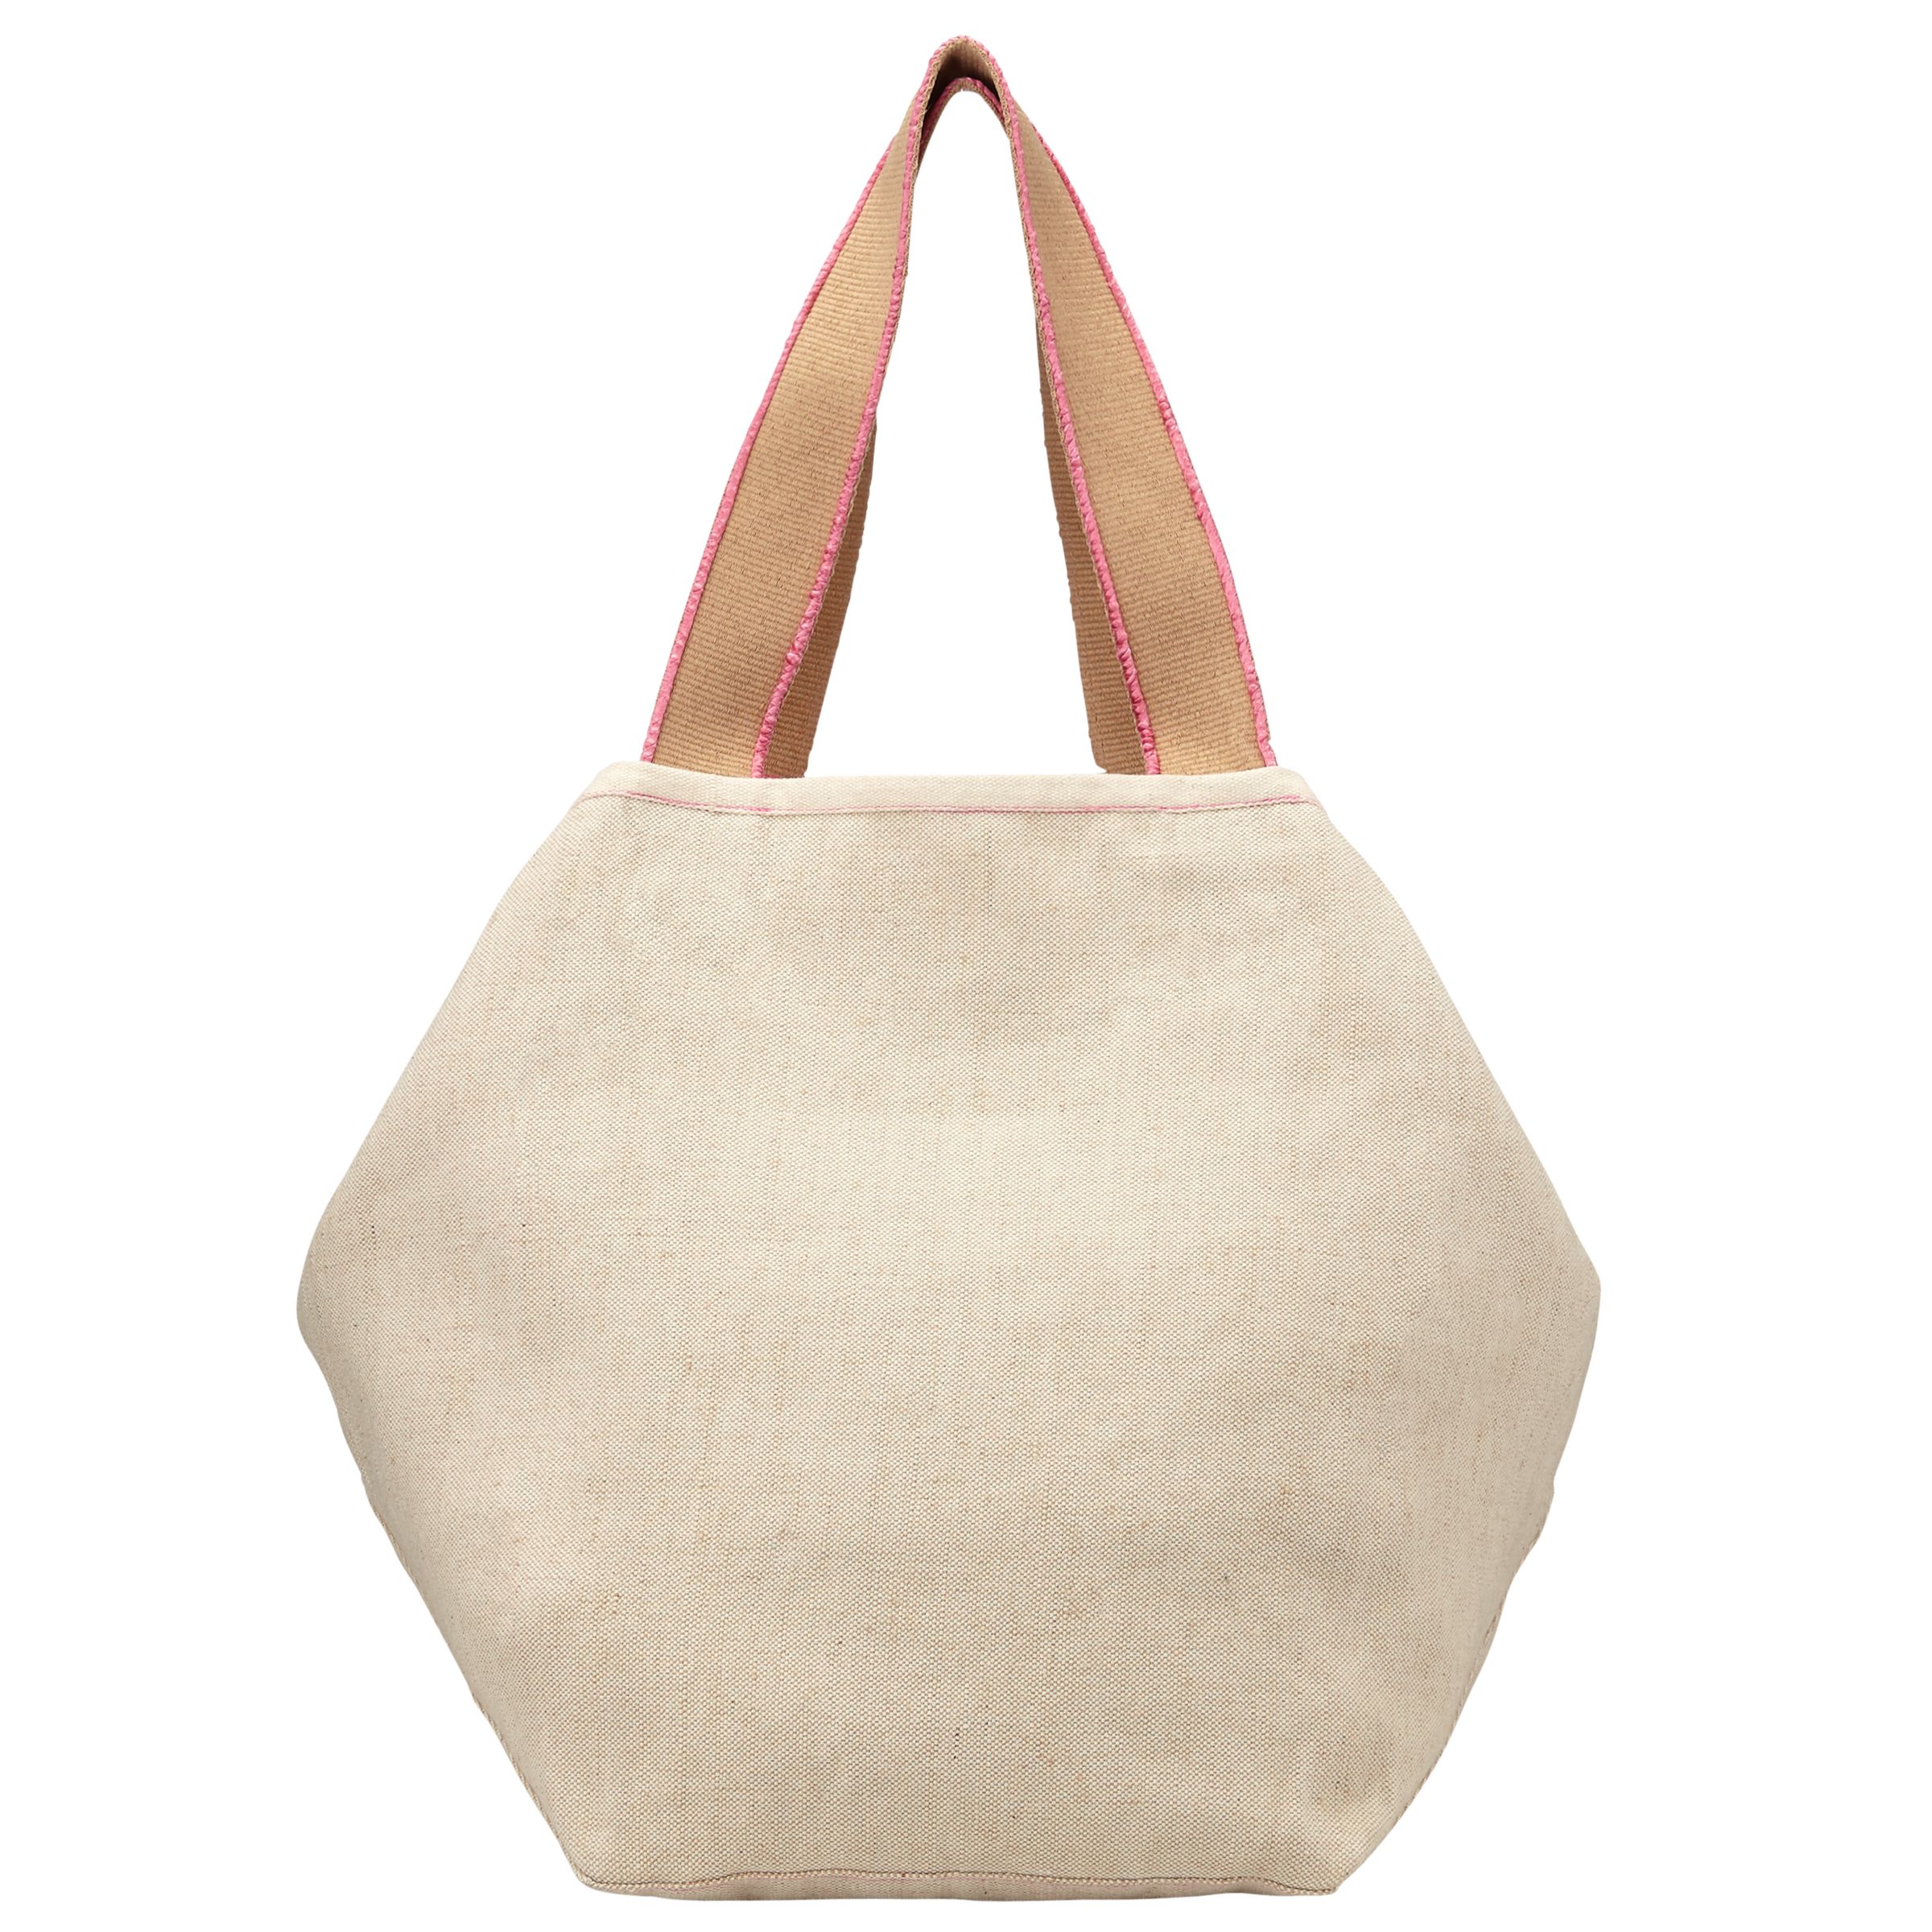 Collection WEEKEND by John Lewis Raffia Tote Bag, Multi at John Lewis & Partners